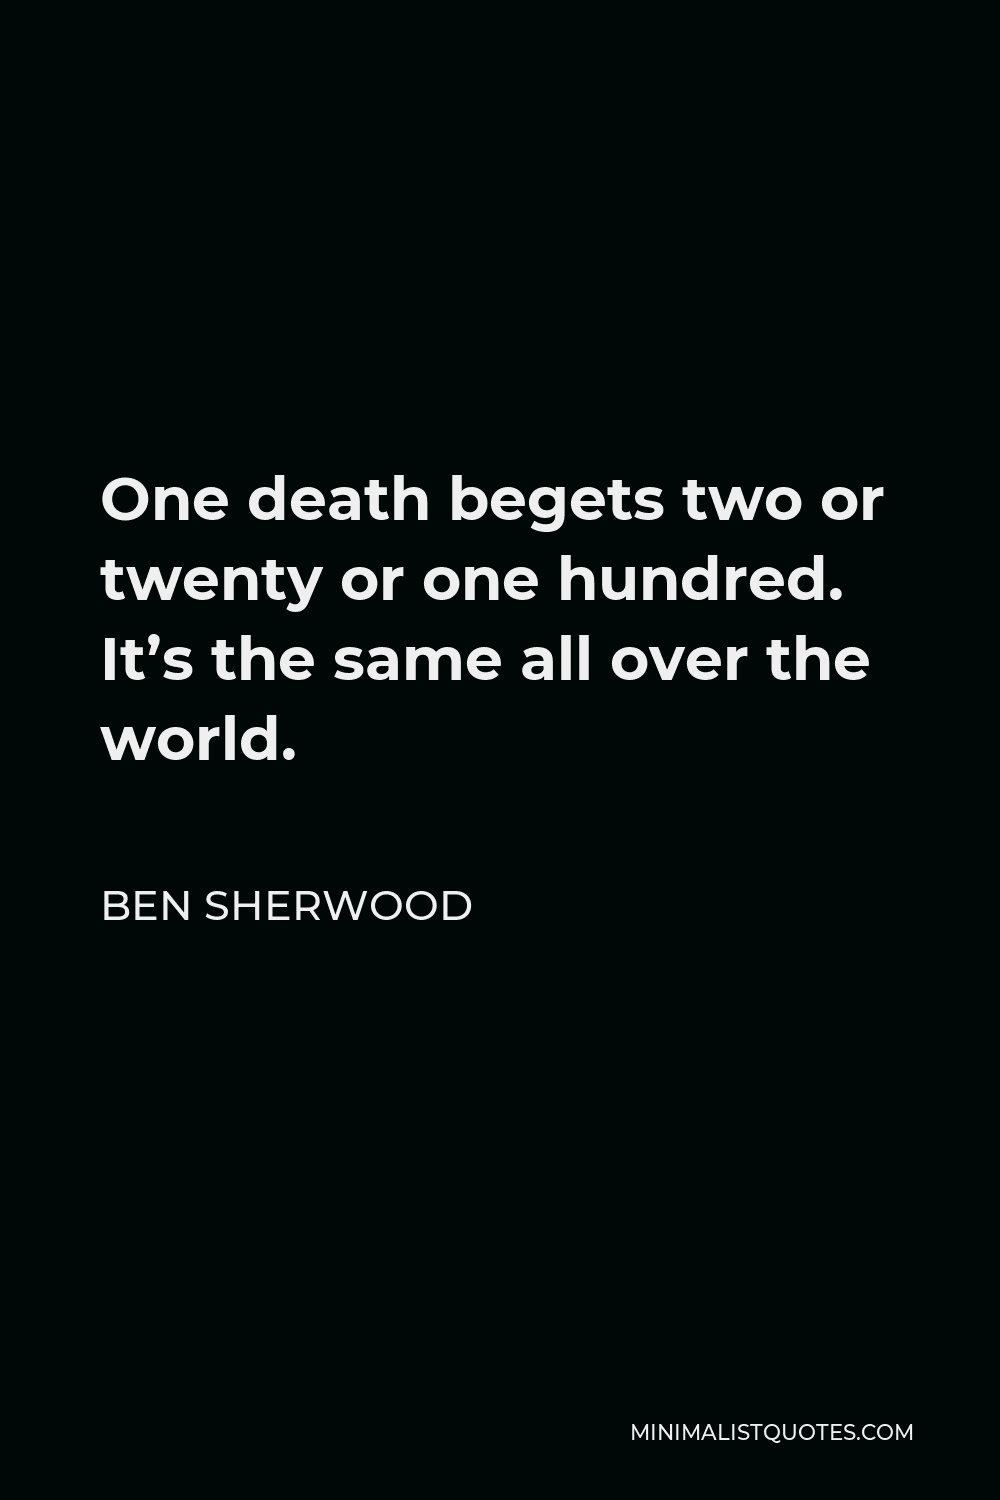 Ben Sherwood Quote - One death begets two or twenty or one hundred. It’s the same all over the world.